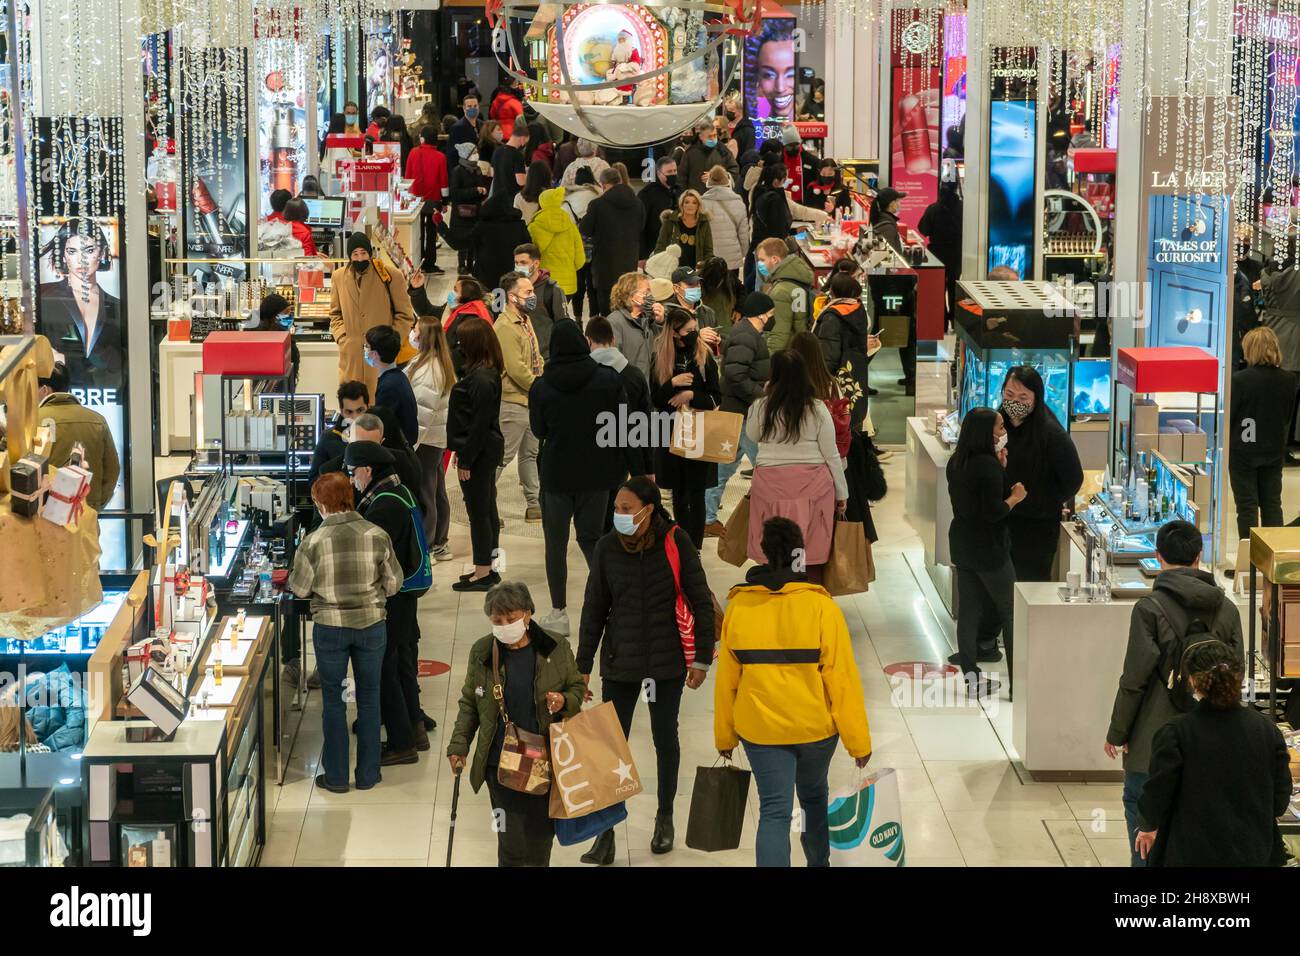 Hordes of shoppers throng the Macy's Herald Square flagship store in New York anxious to shop on the day after Thanksgiving, Black Friday, November 26, 2021. Hordes of shoppers attacked stores anxious to return to some degree of normalcy lost during the pandemic.  (© Richard B. Levine) Stock Photo